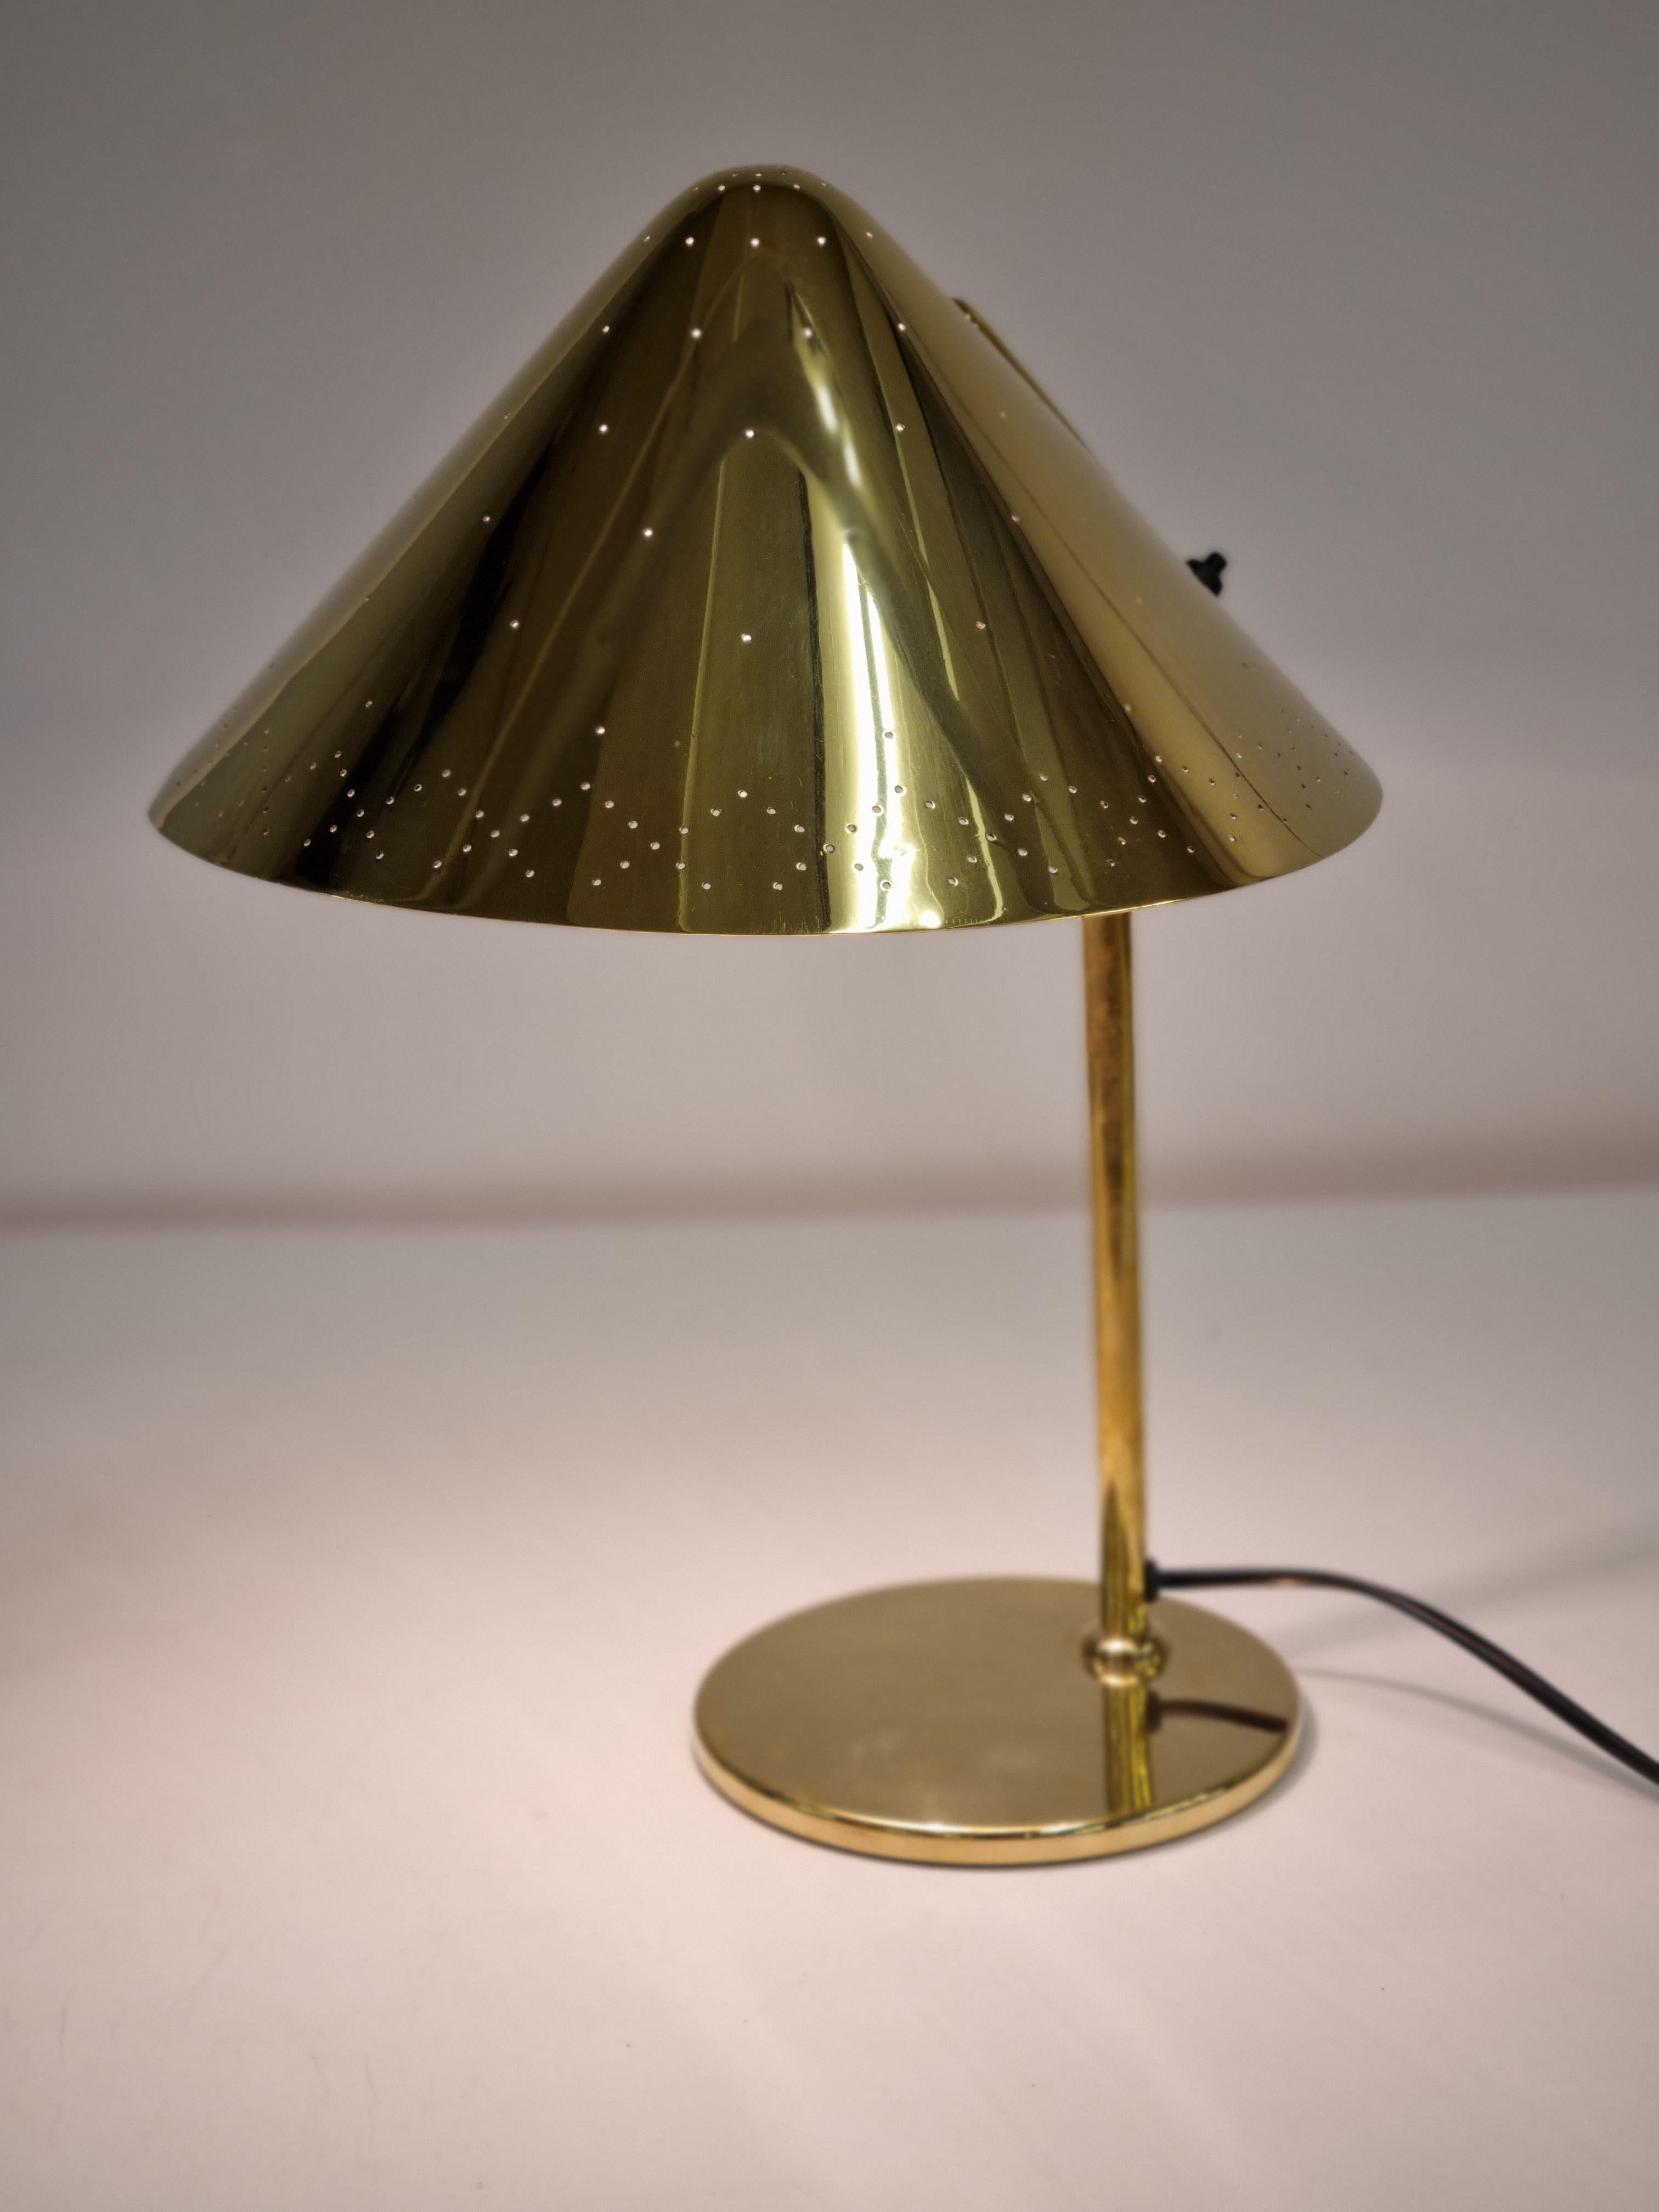 An extremely rare commissioned lamp by Paavo Tynell. This lamp has features from several models yet has a unique perforated cone shape shade that is not found in any other standard models. A similar example can be found in a drawing from the Tynell